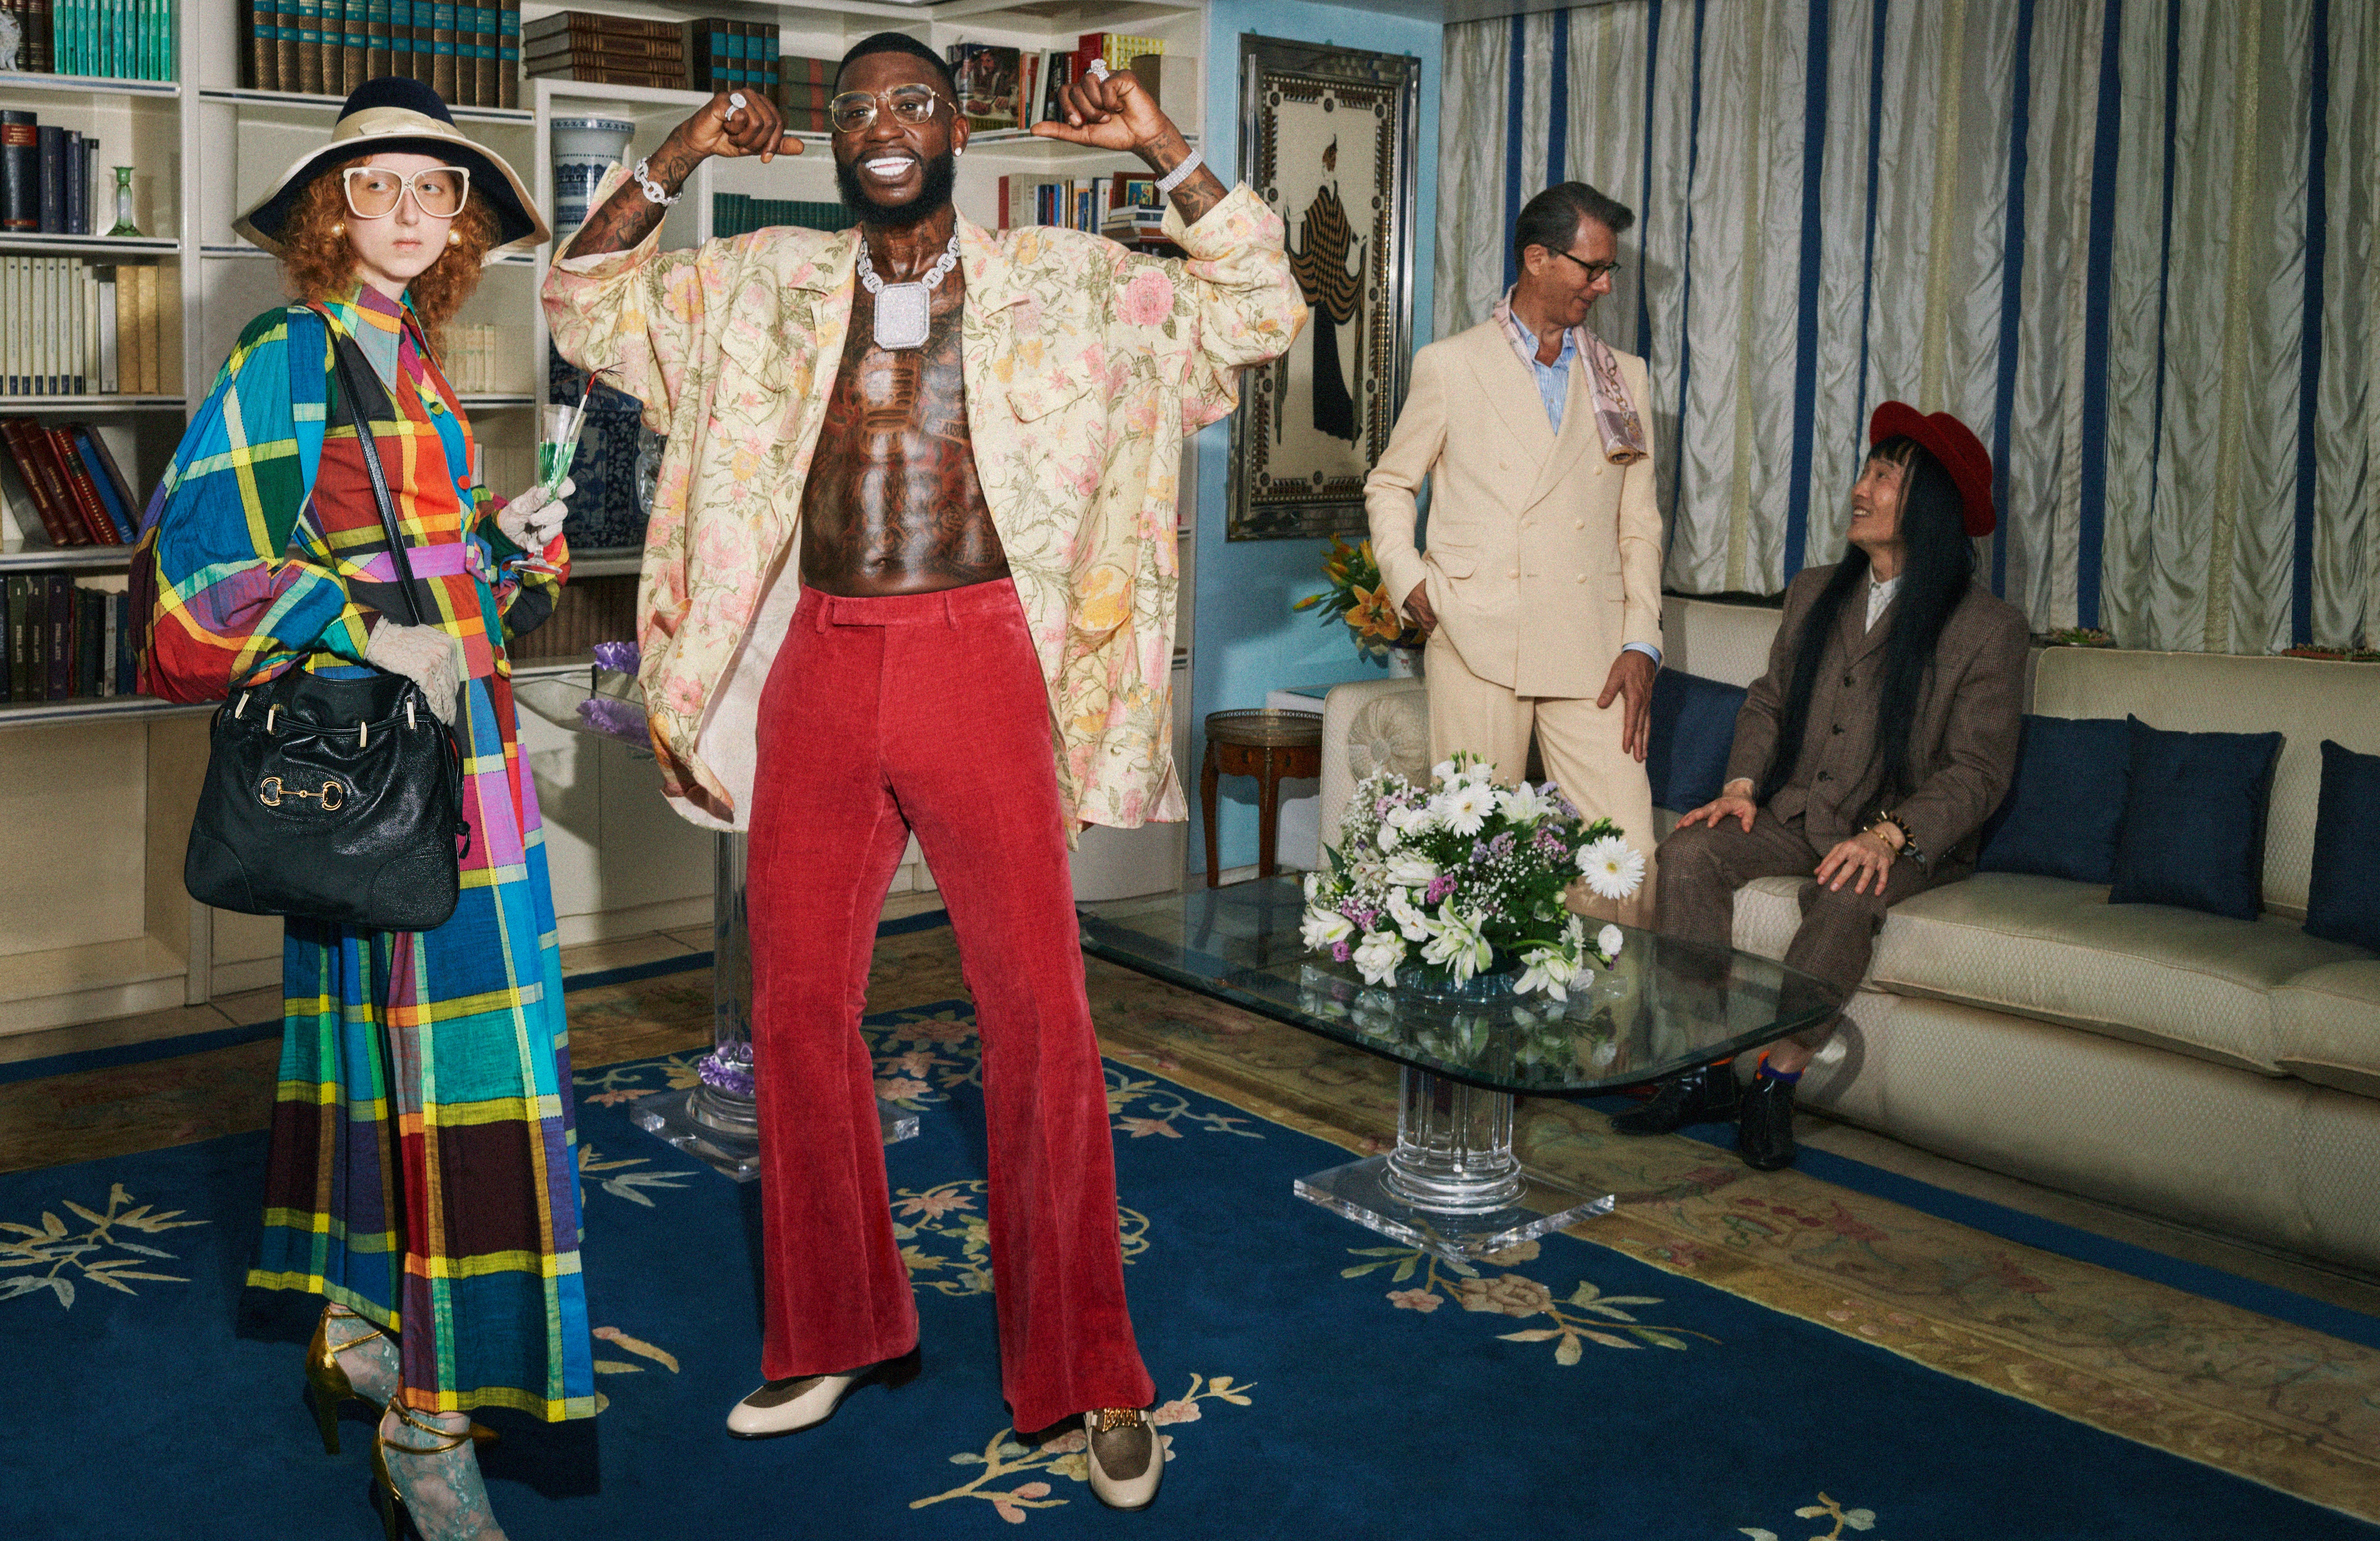 Gucci Mane Is the New Face of Gucci’s S/S 2020 Campaign